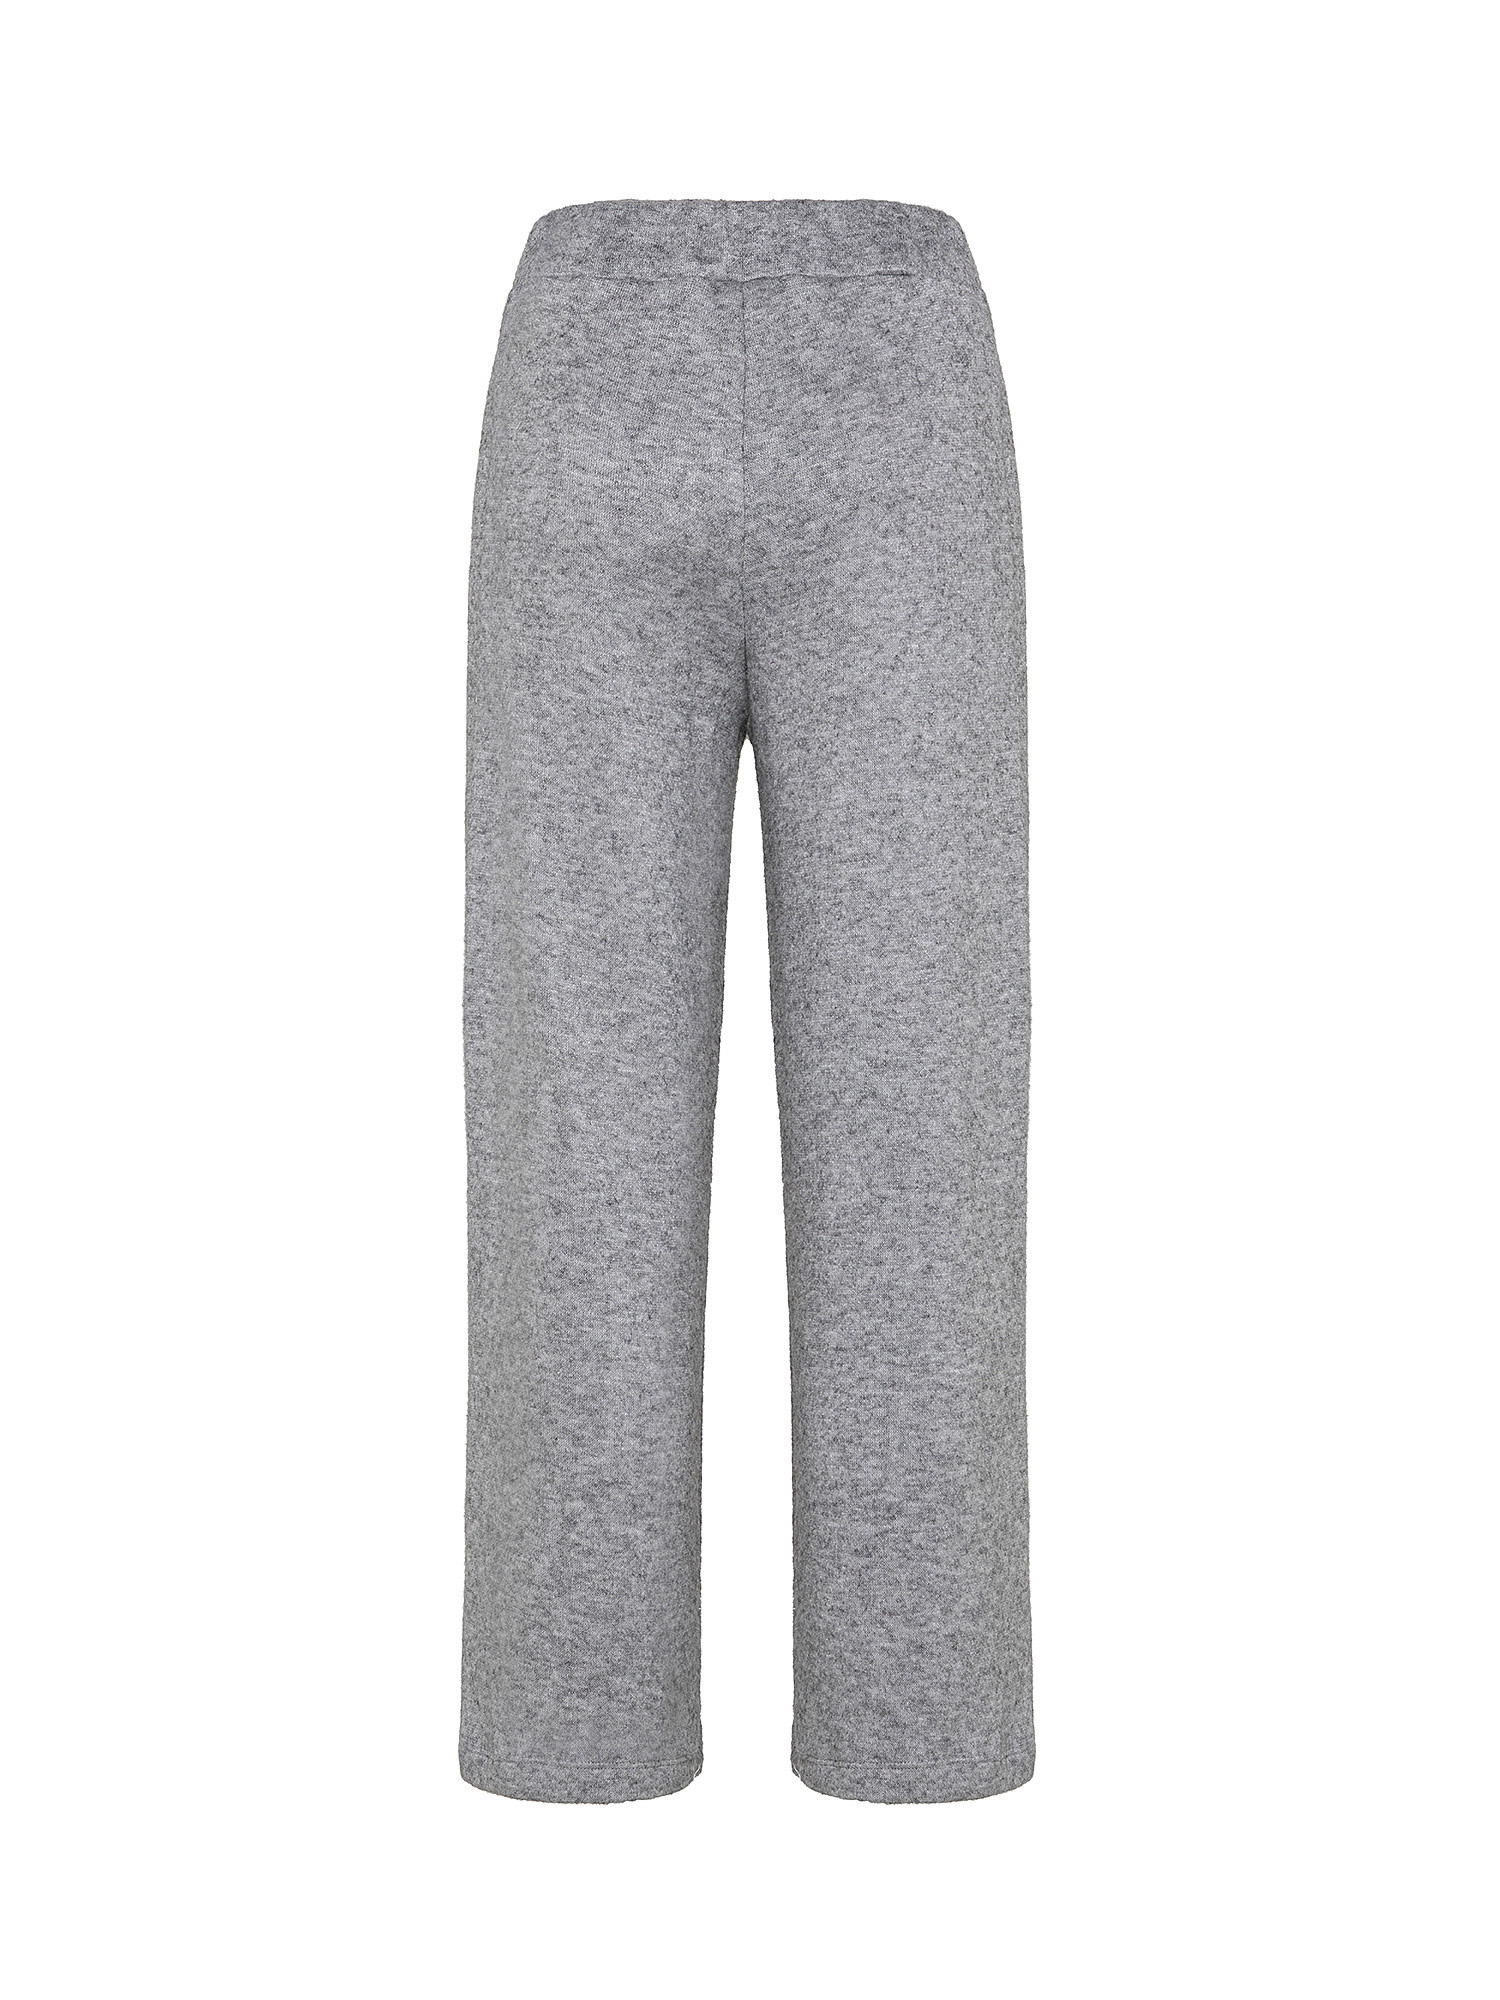 Jersey trousers with elasticated waist, Light Grey Melange, large image number 1